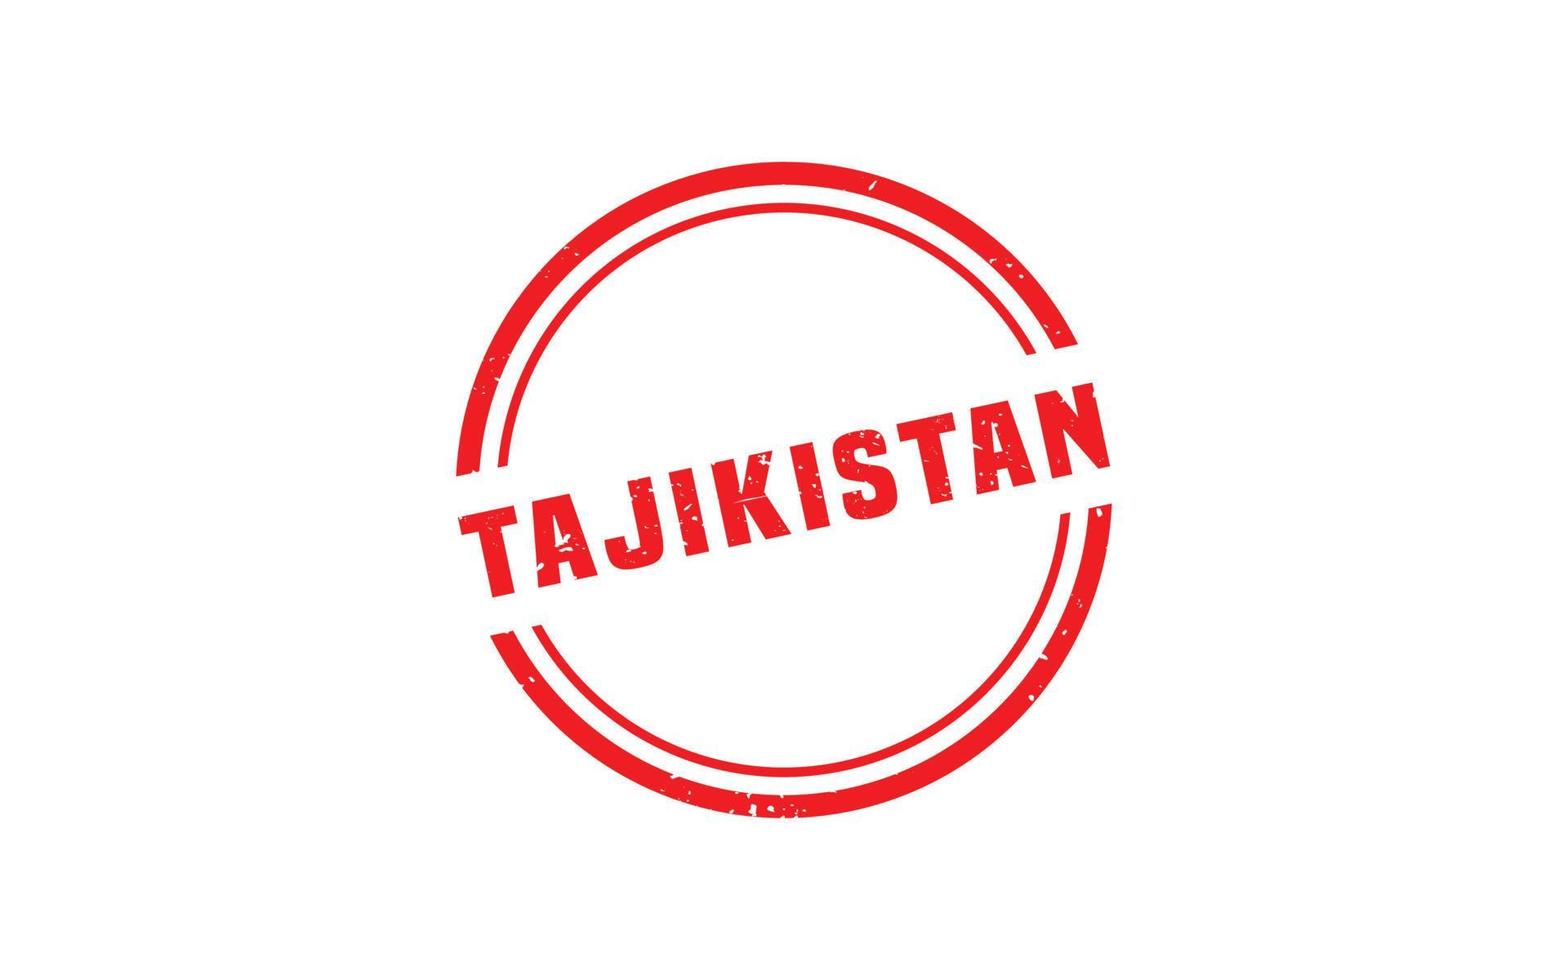 TAJIKISTAN stamp rubber with grunge style on white background vector